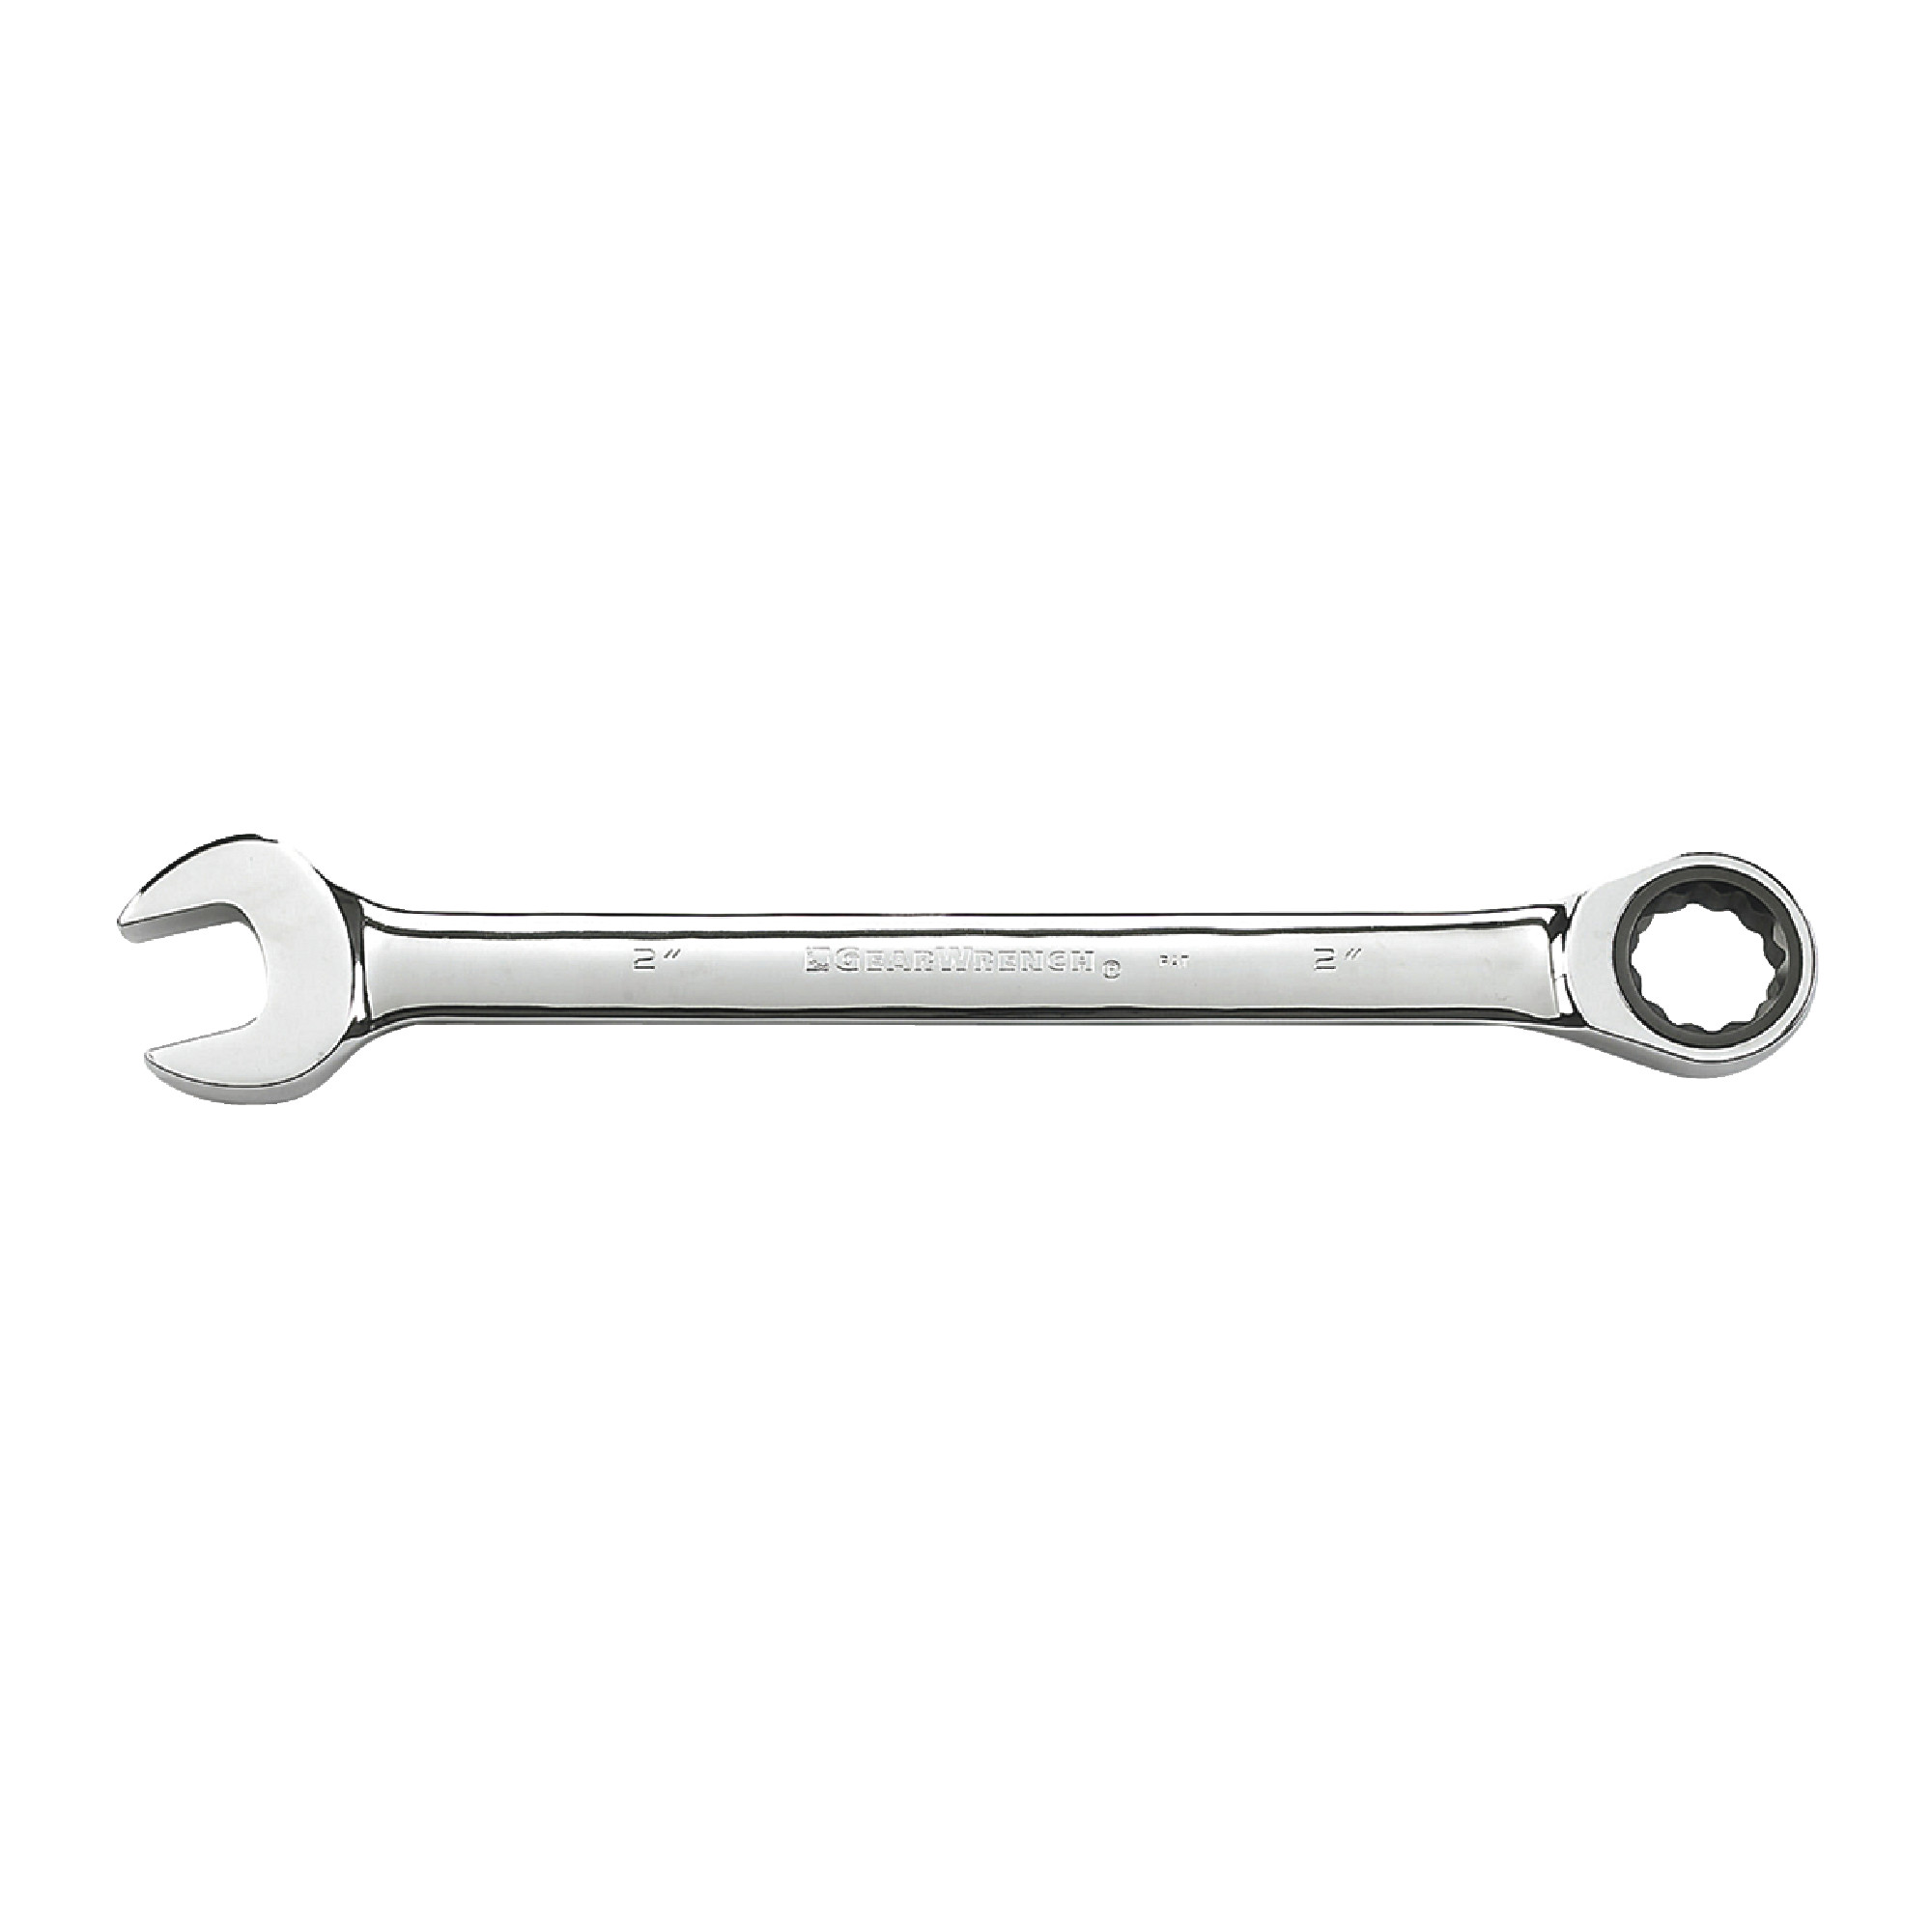 1-7/8" 12 Point Jumbo Ratcheting Combination Wrench